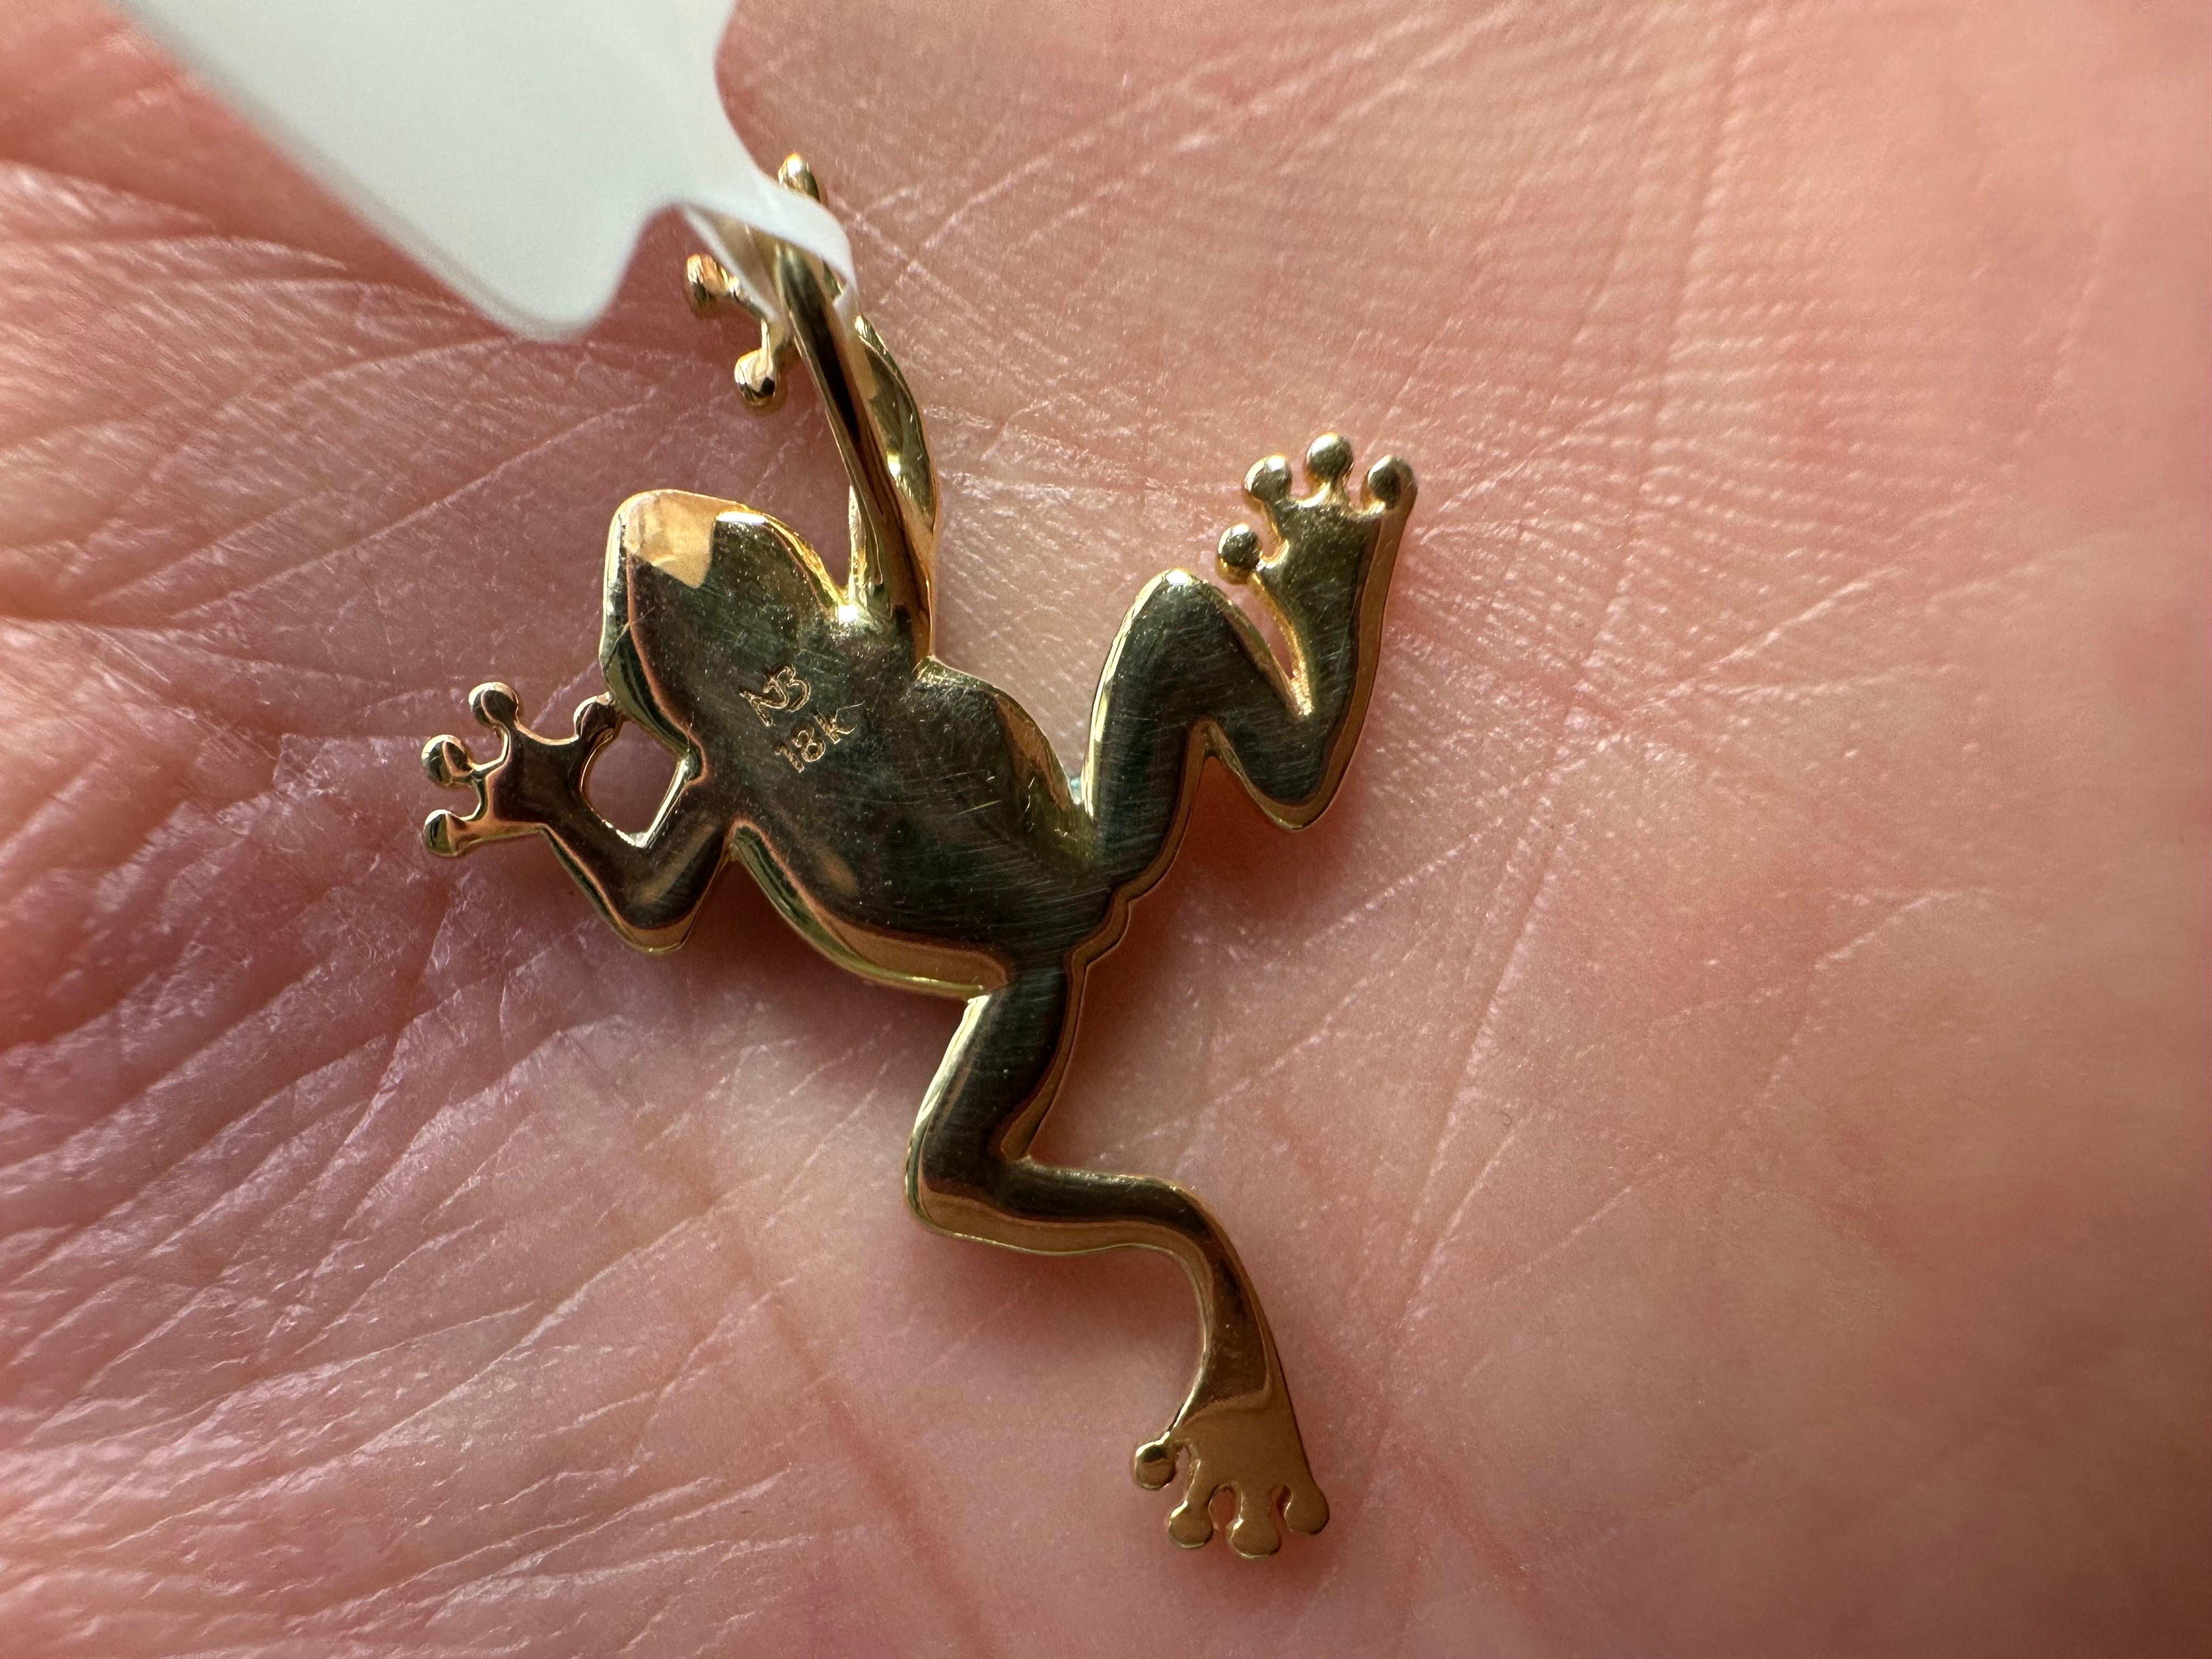 Exquisite green frog made with solid 18KT gold and complex multi color enamel artwork. Comes with 18